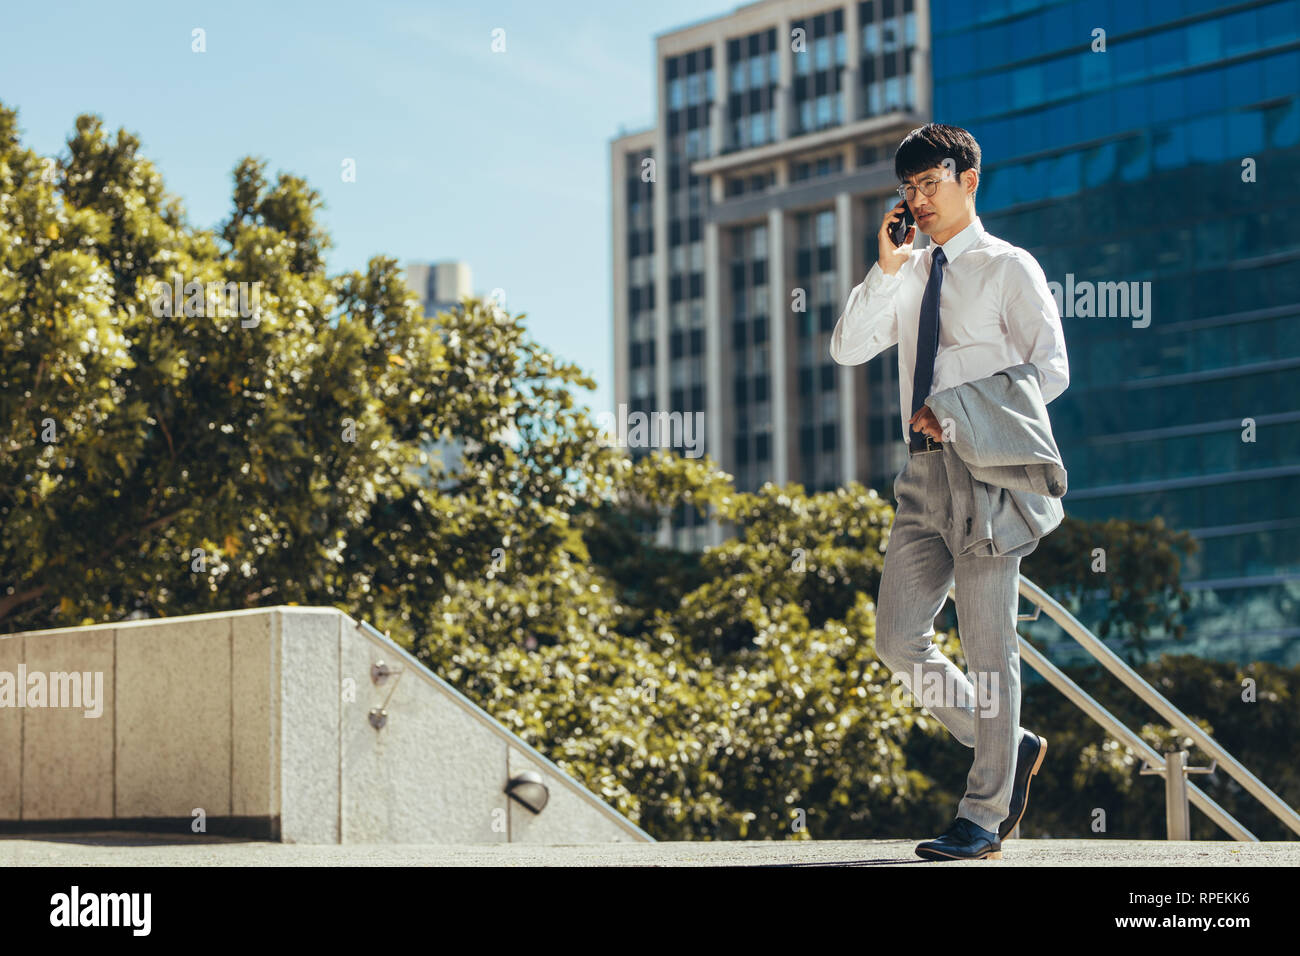 businessman talking on his cell phone while walking outdoors. Man making a phone call against a office building in background. Stock Photo